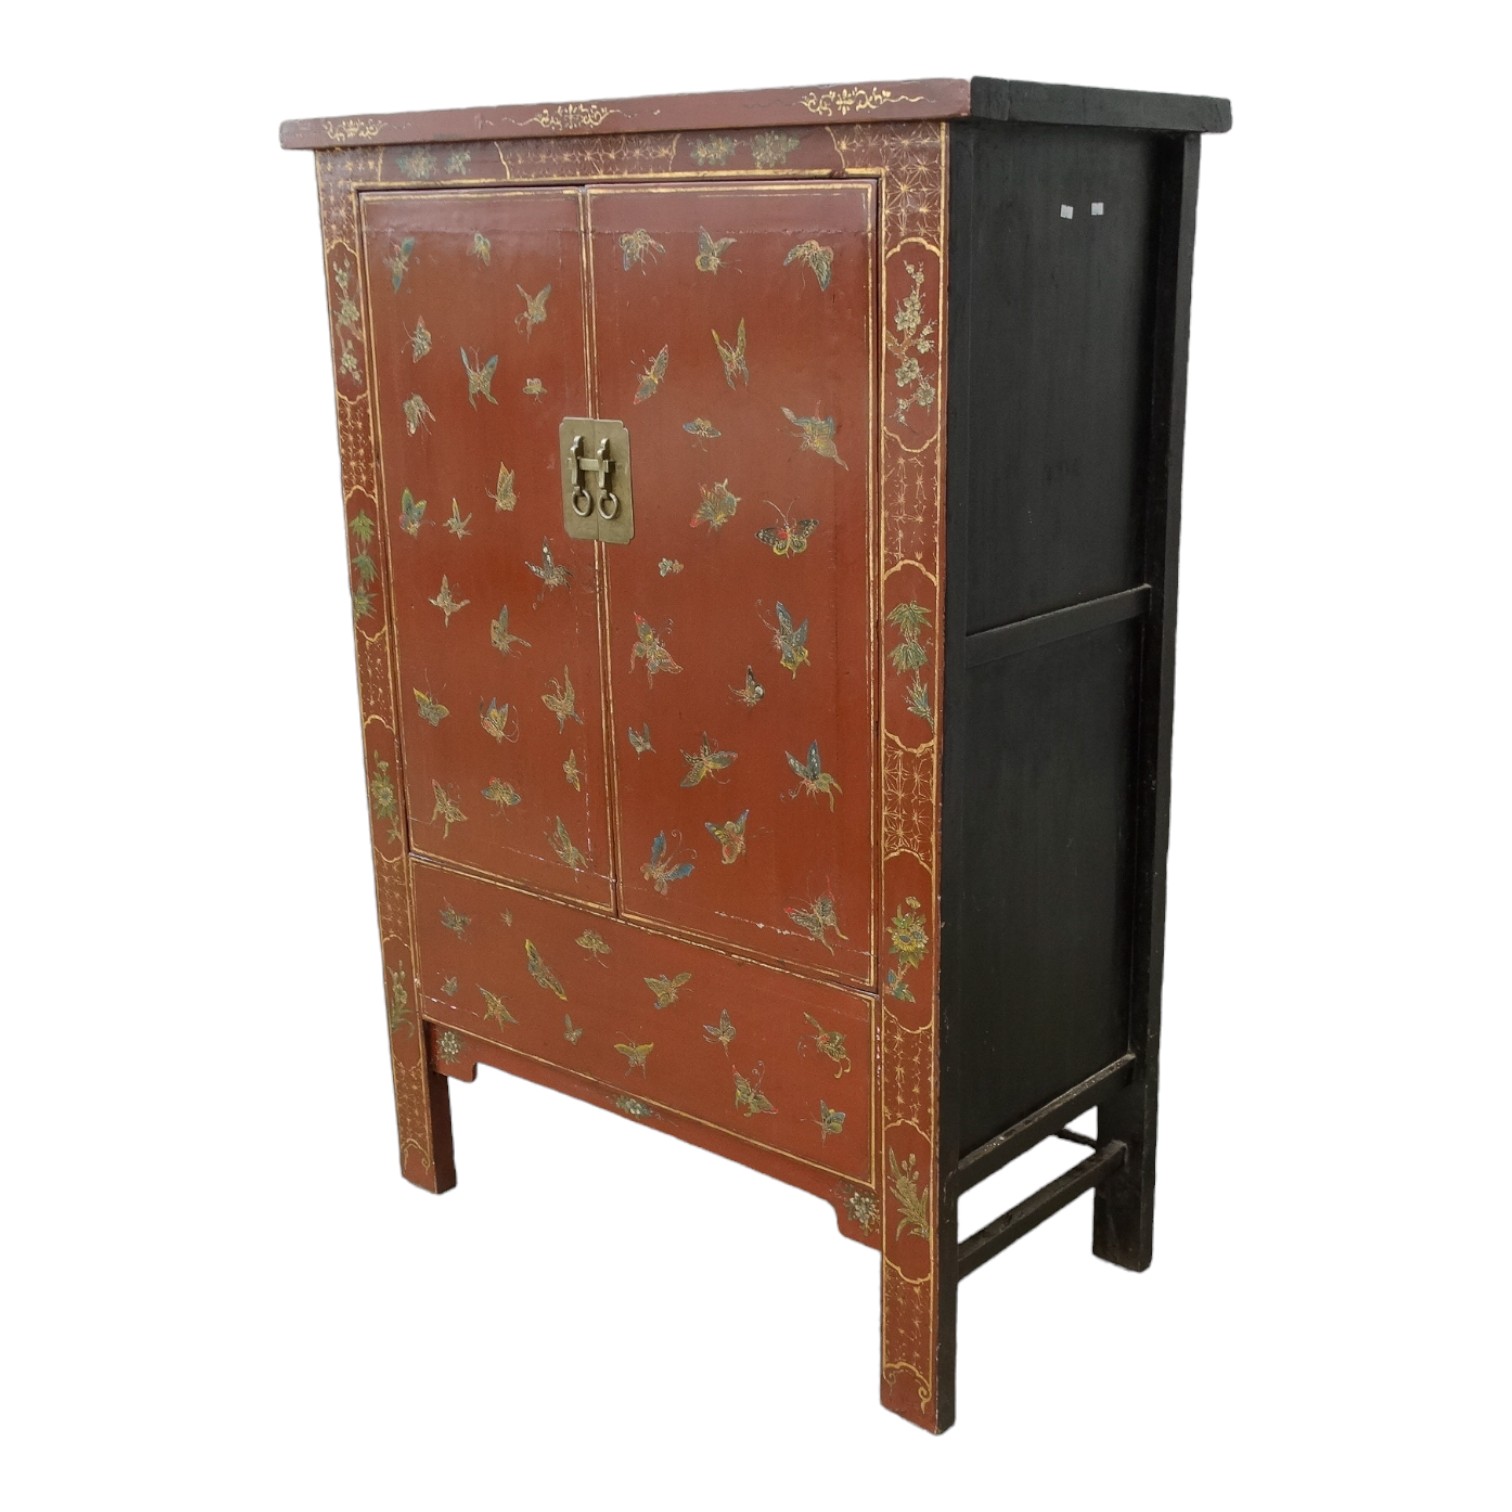 A 19th century Chinese lacquered cabinet - decorated with butterflies and cherry blossom, the pair - Image 2 of 7